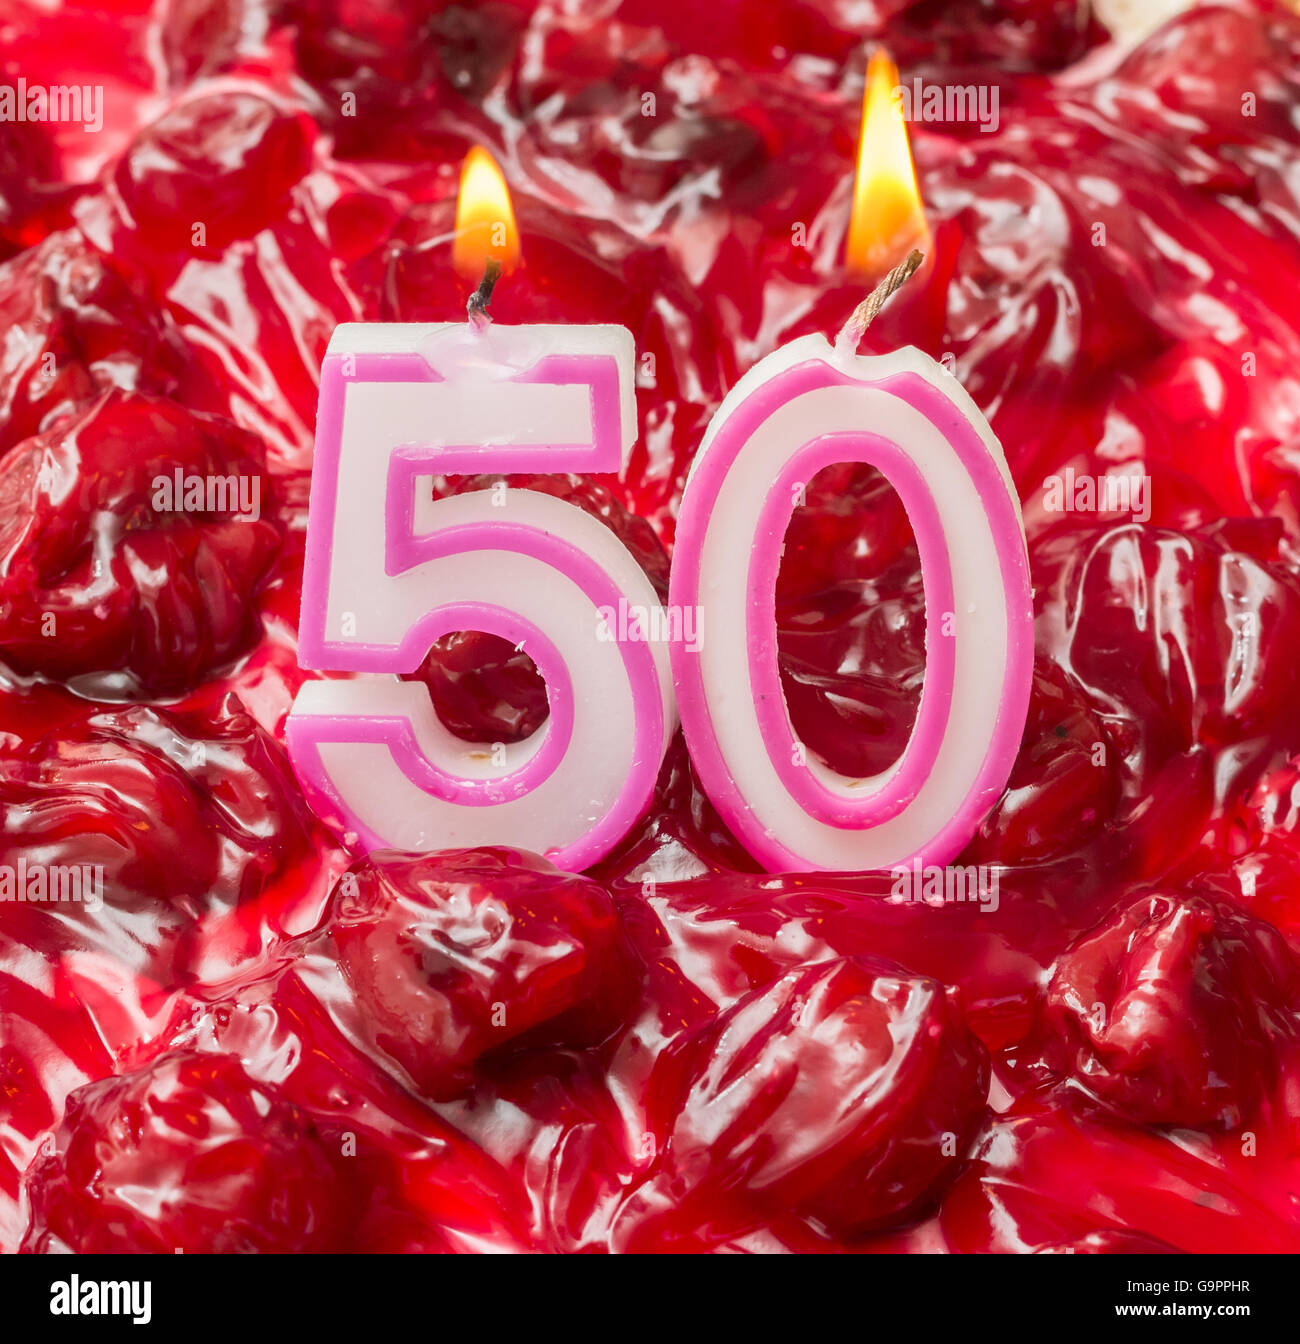 Cherry cheese cake with burning candles for 50th birthday Stock Photo